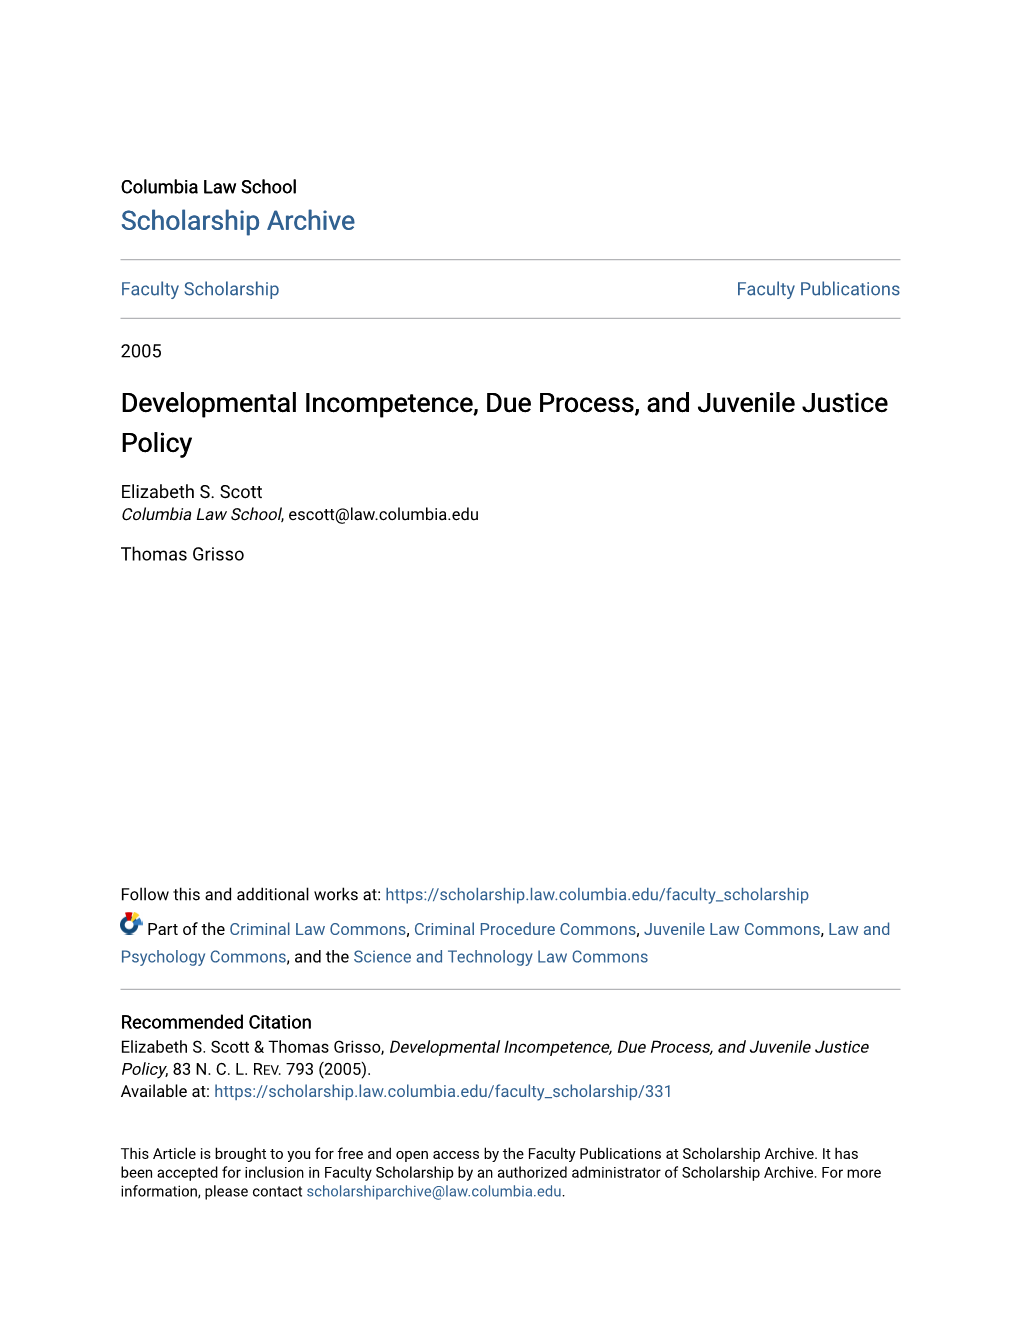 Developmental Incompetence, Due Process, and Juvenile Justice Policy